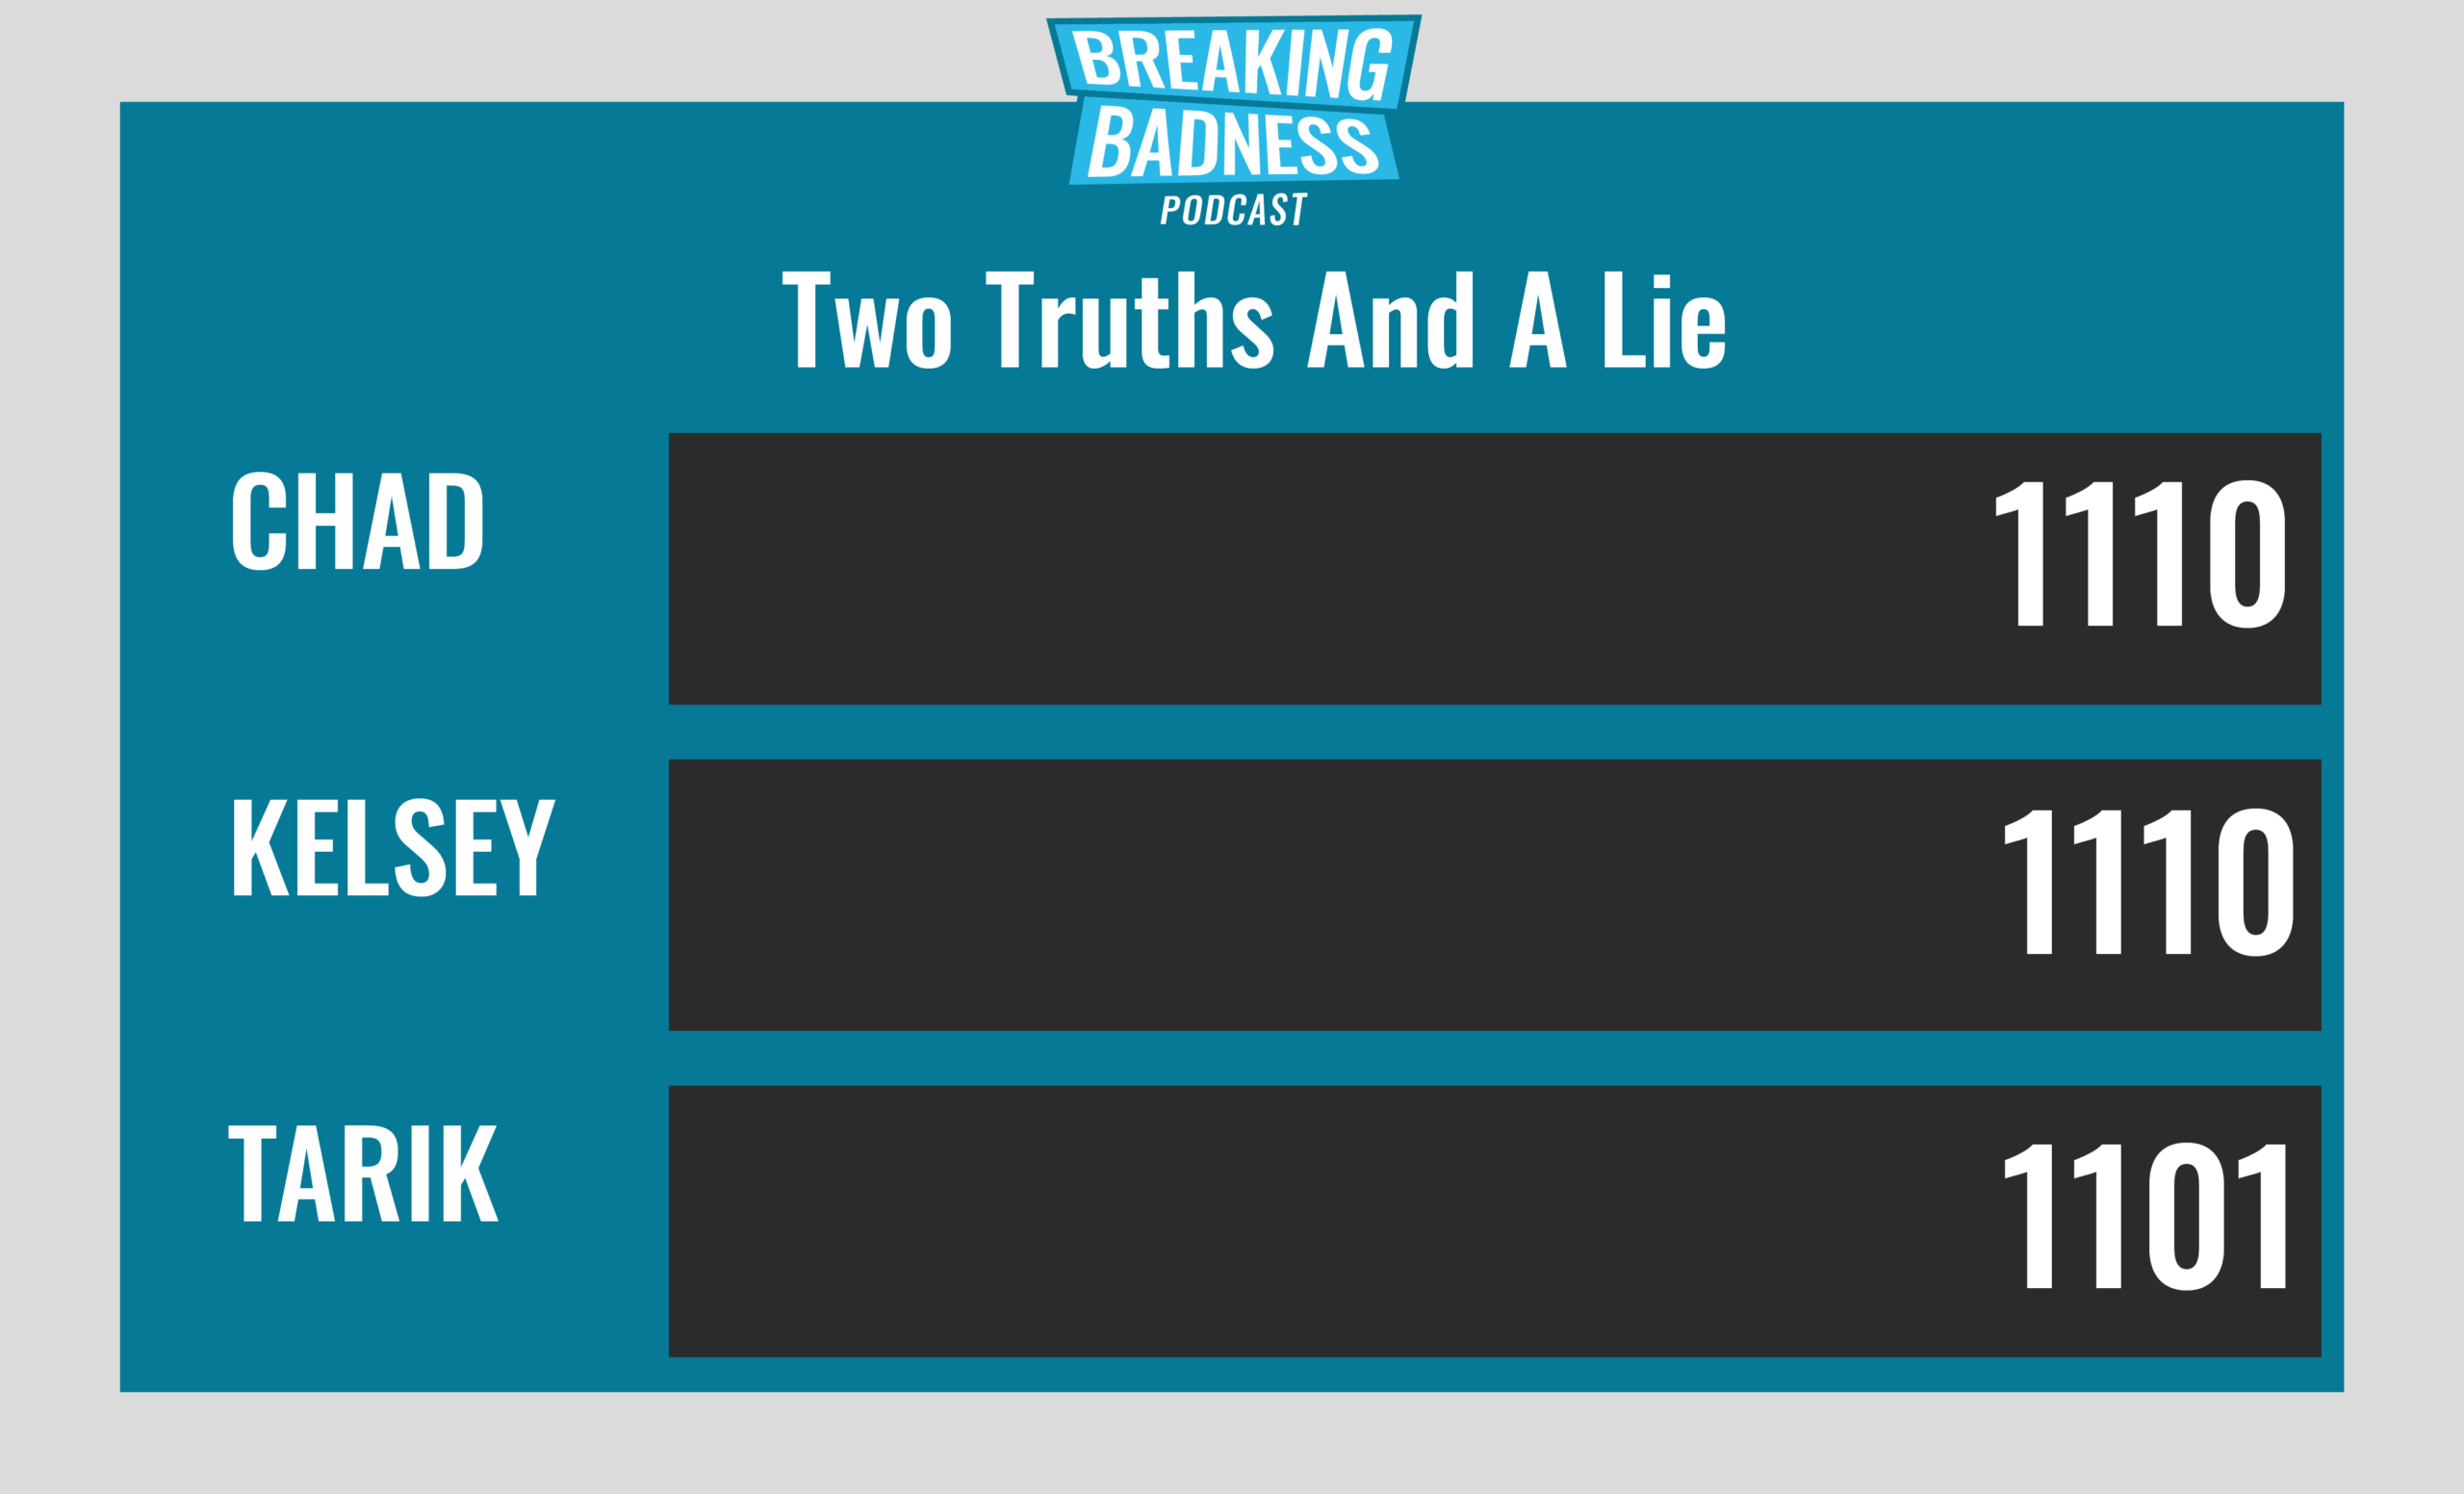 Breaking Badness Two Truths and a Lie